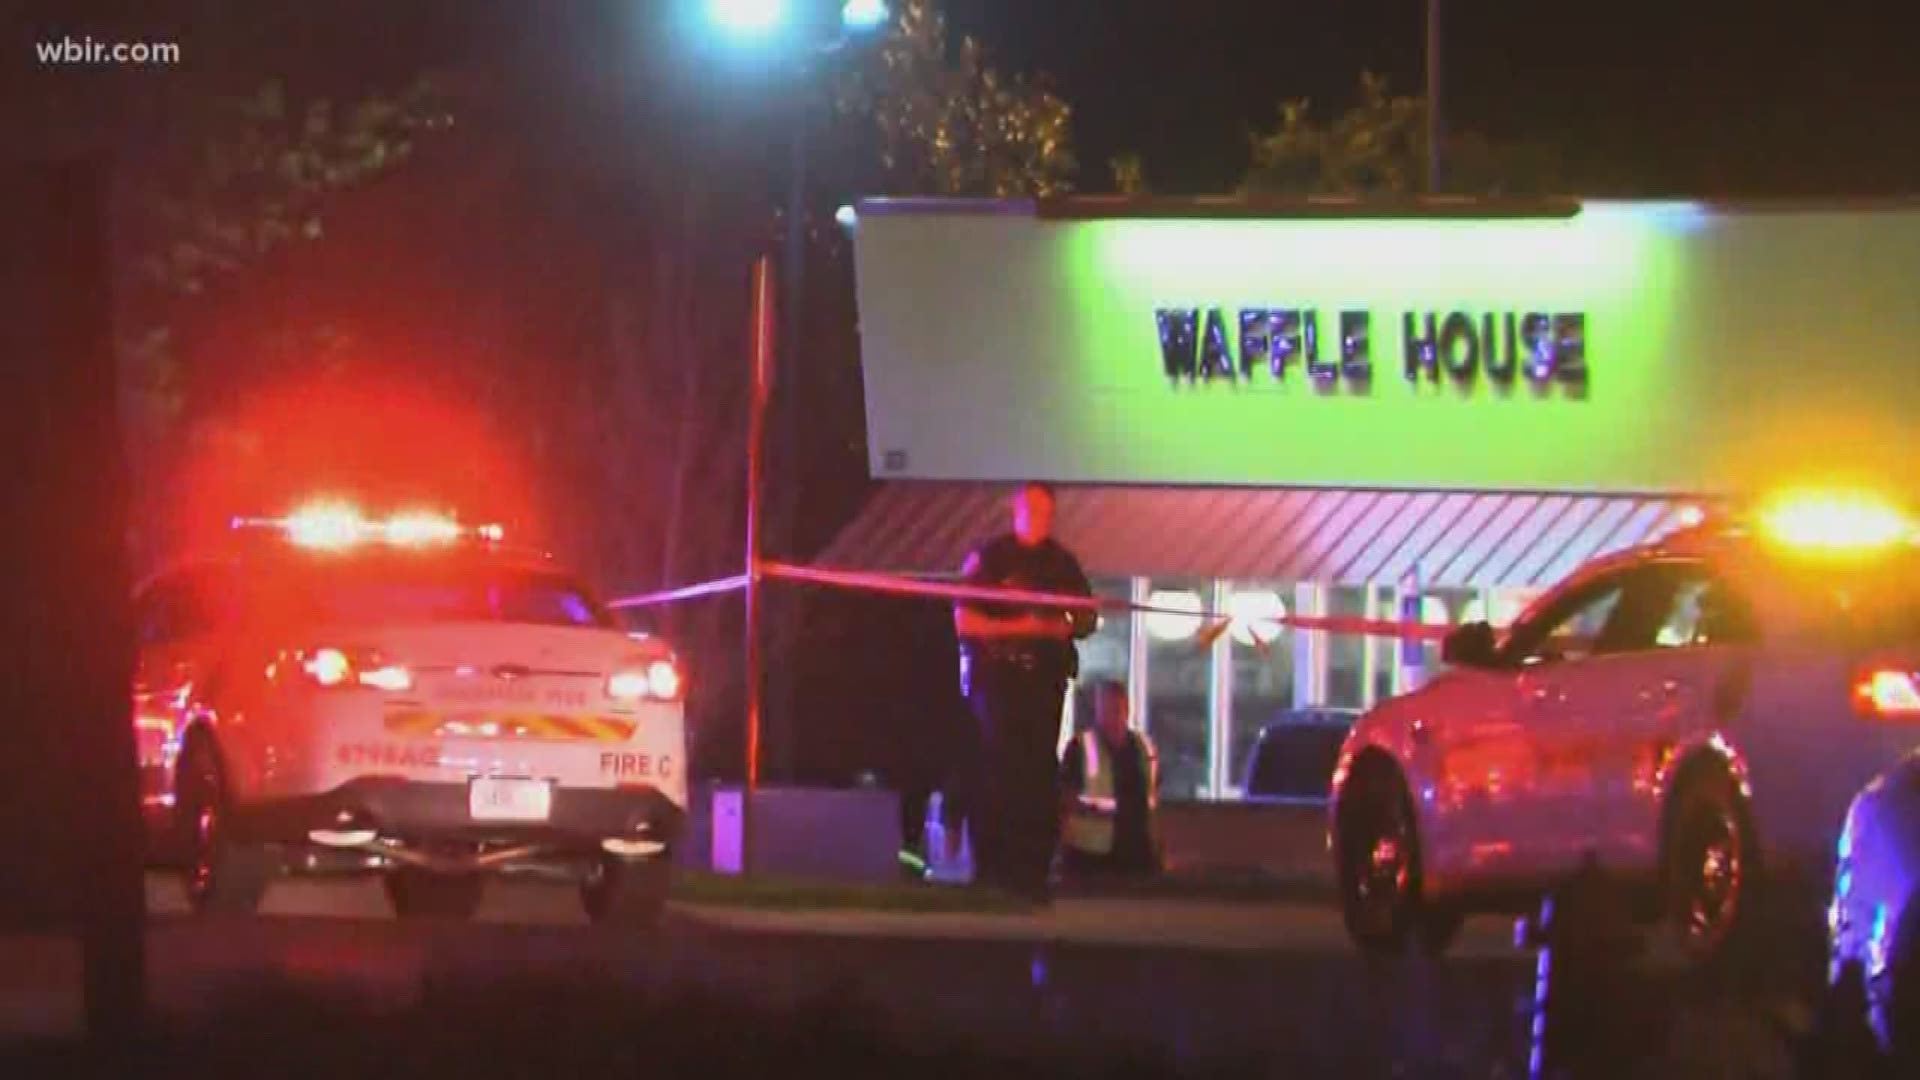 At least 4 are dead after a shooting at a Waffle House in Antioch.